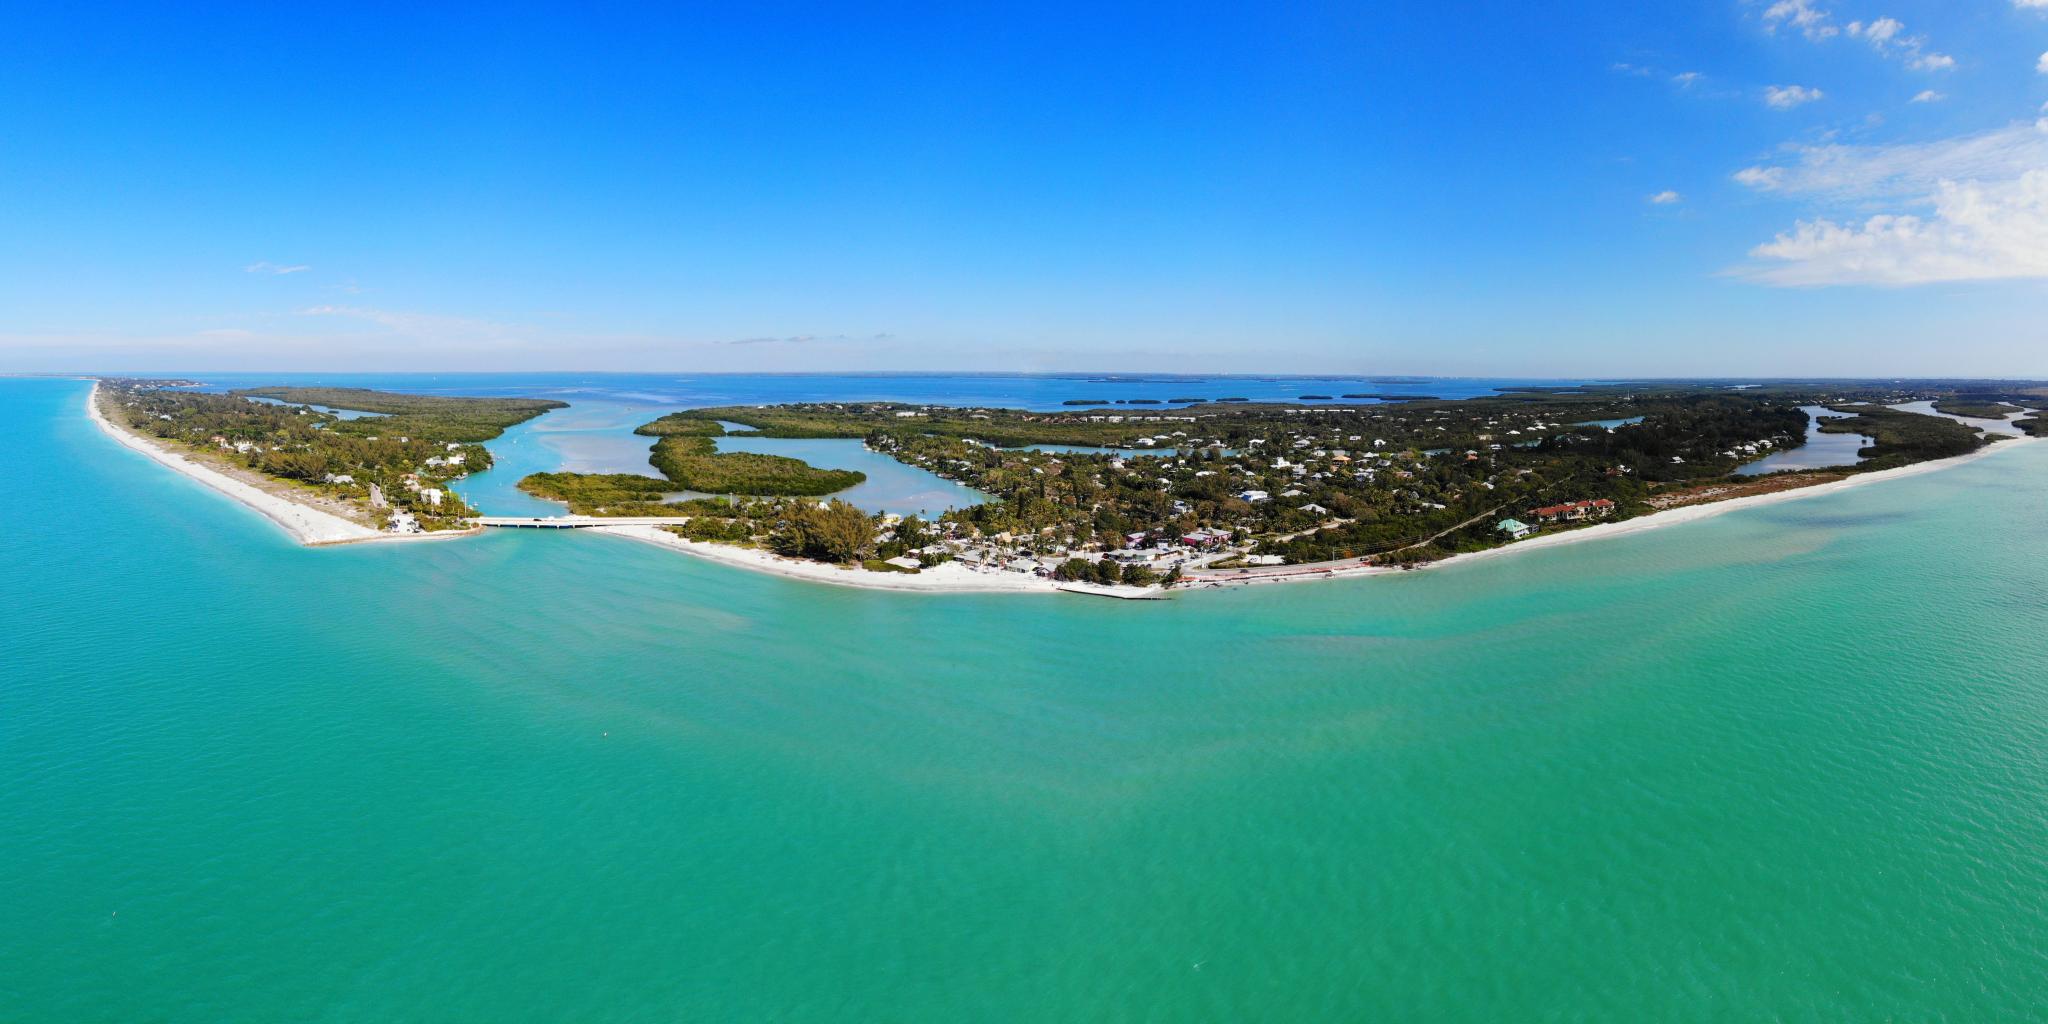 Can you Drive to Sanibel Island? - LazyTrips